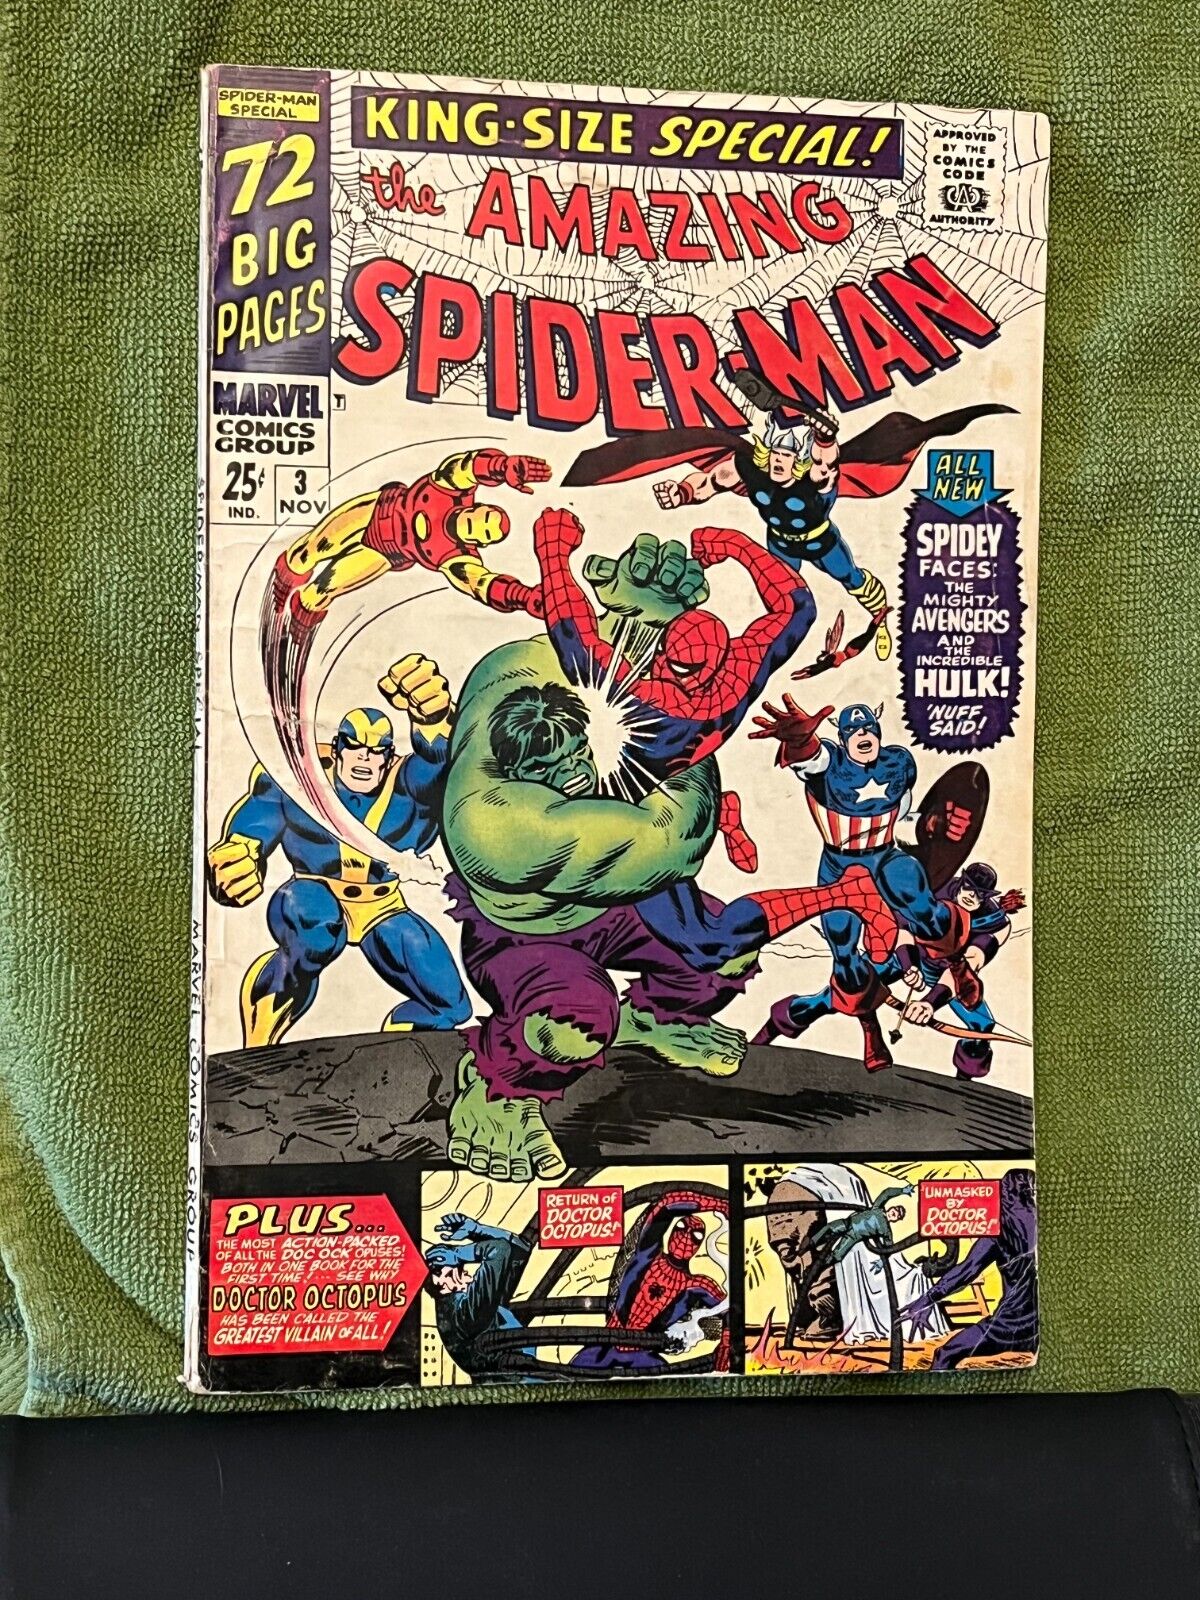 AMAZING SPIDER-MAN KING SIZE SPECIAL 3 NICE VG COPY GREAT GLOSS WOW MAKE OFFER